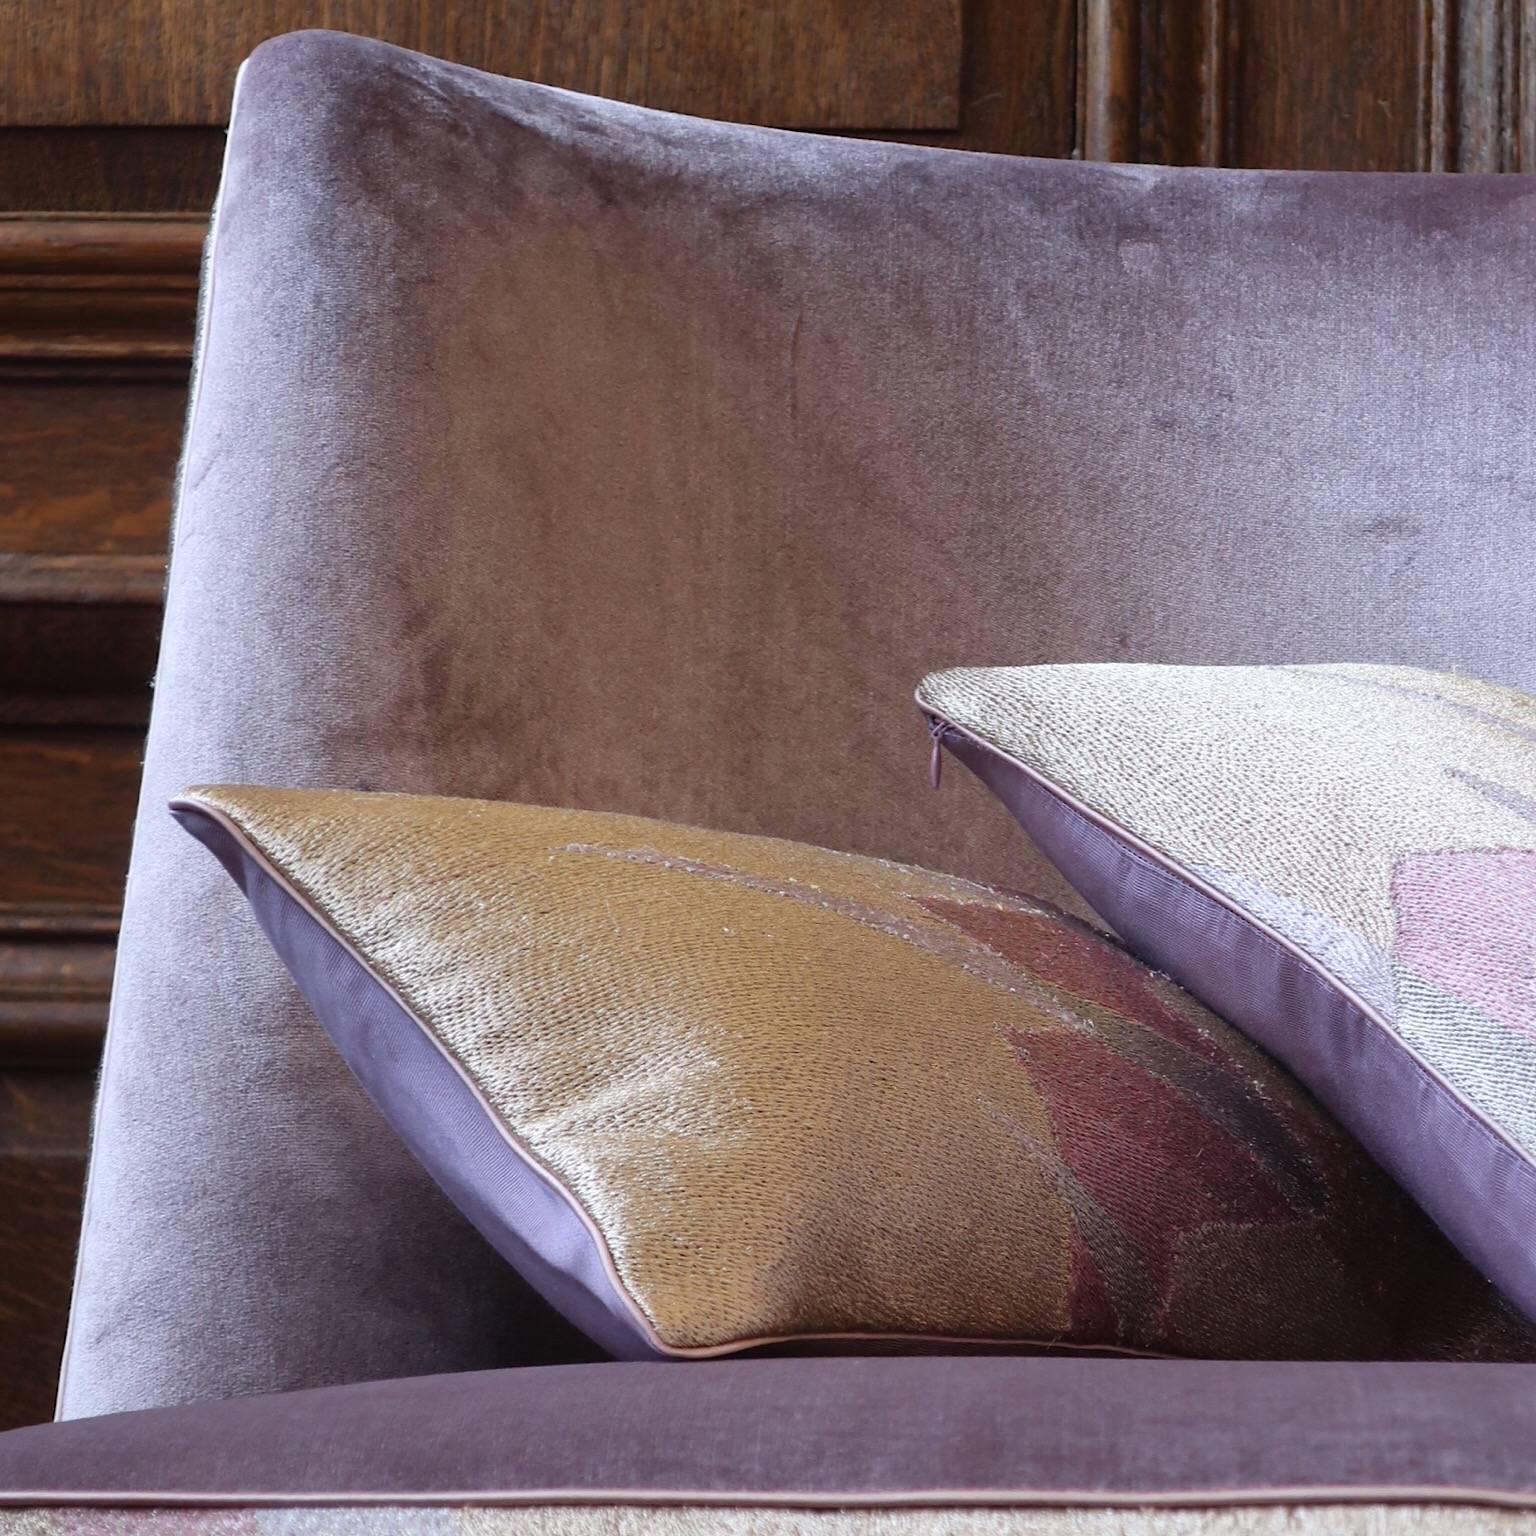 Handcrafted chair is a perfect occasional piece to add a touch of luxury to a living room or bedroom.
Designed with smooth curves and upholstered in hand embroidered pastel silk and metallic threads in shades of lilac, pink and pale